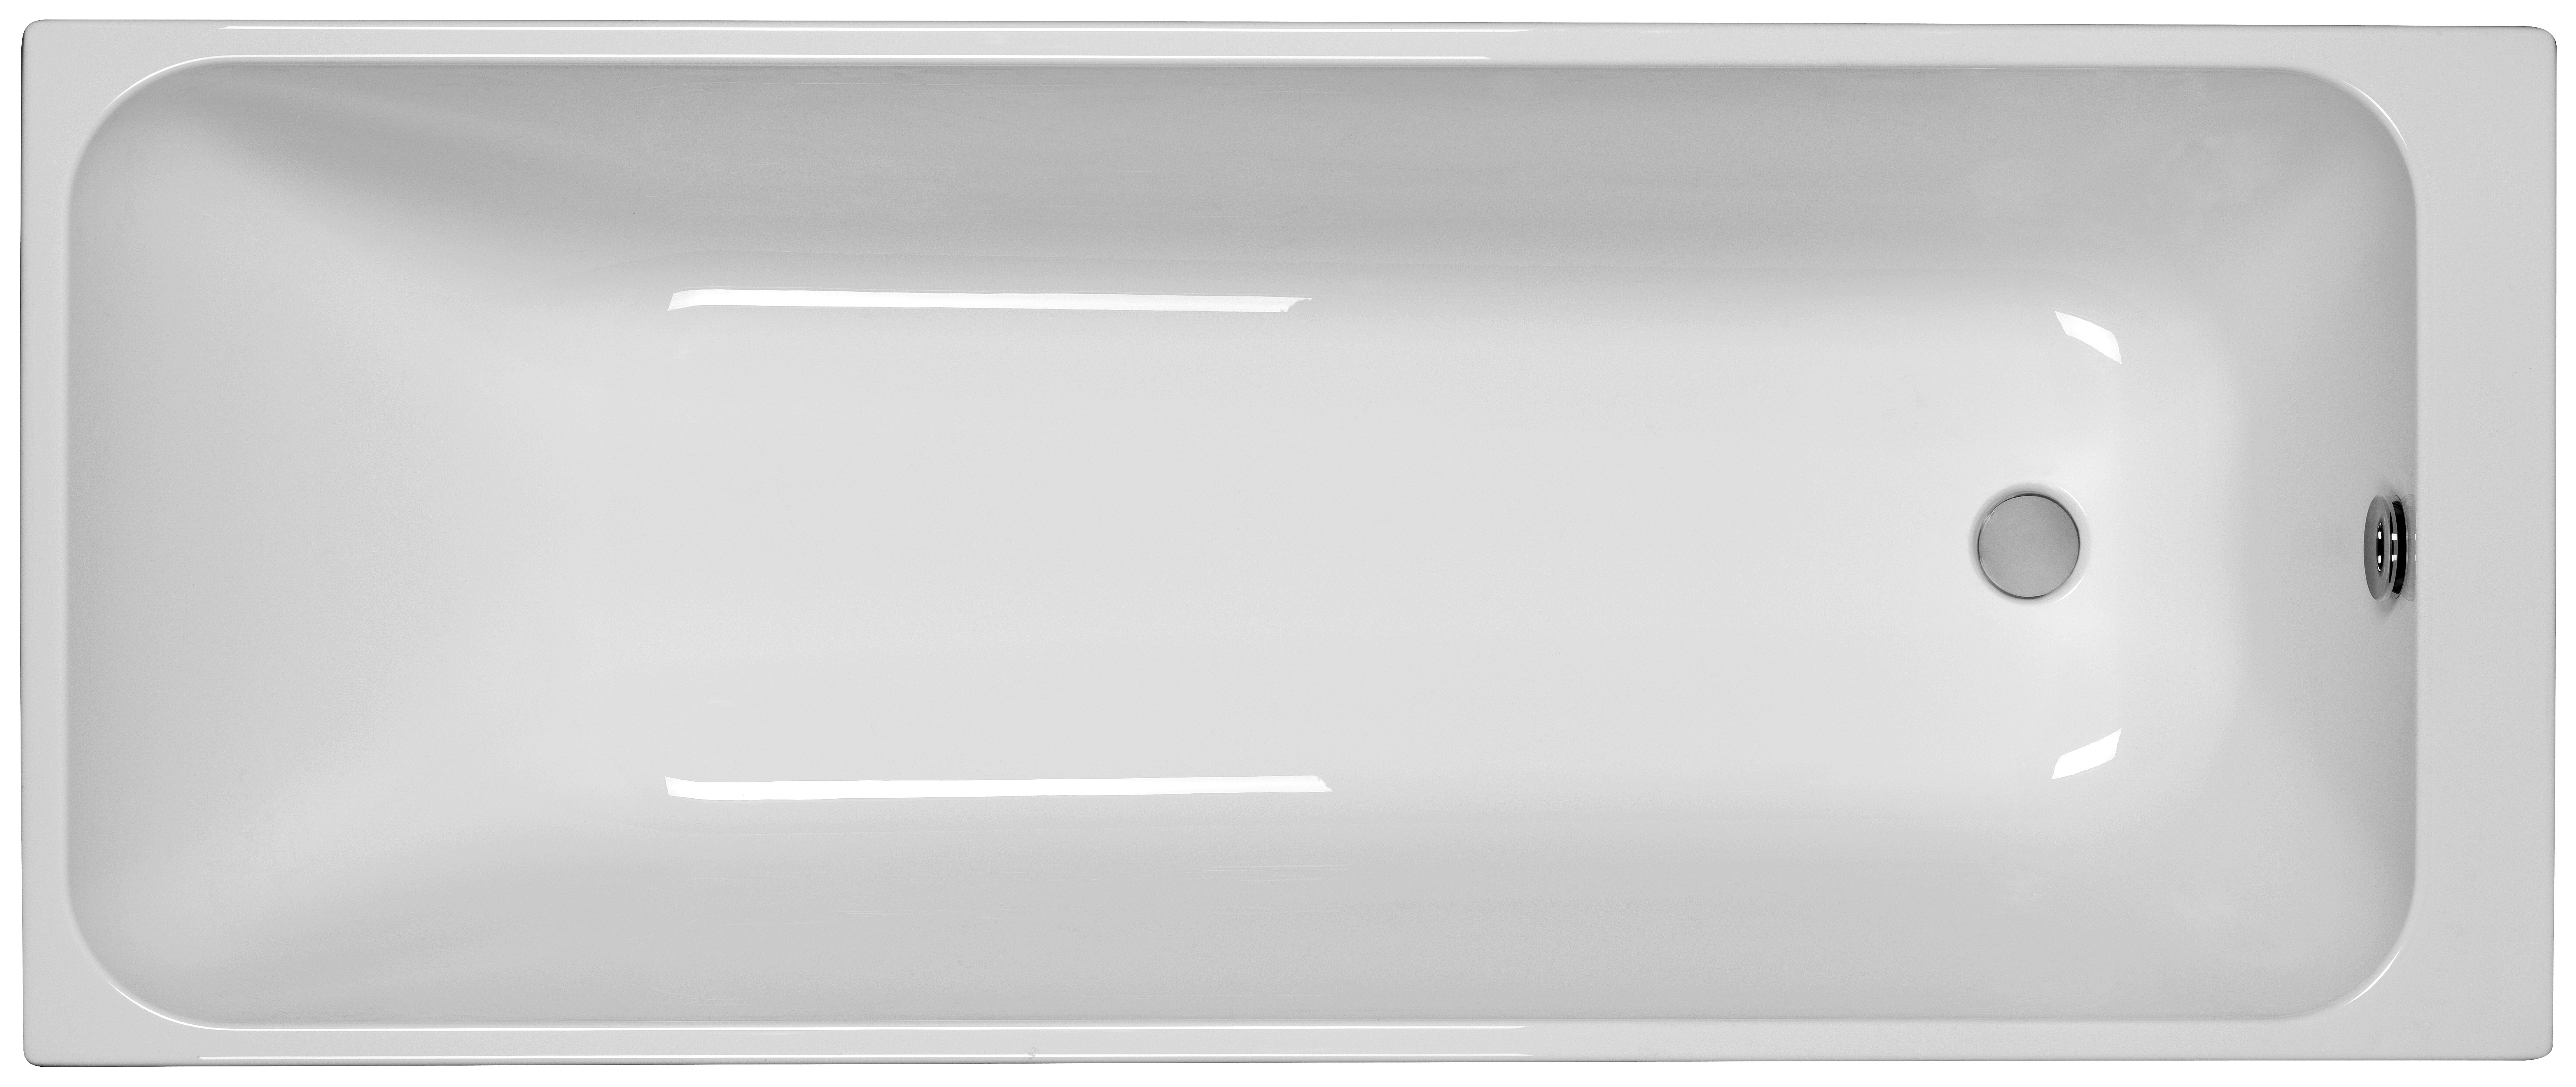 Carron Profile Single Ended No Tap Hole Bath with Front Bath Panel - Various Sizes